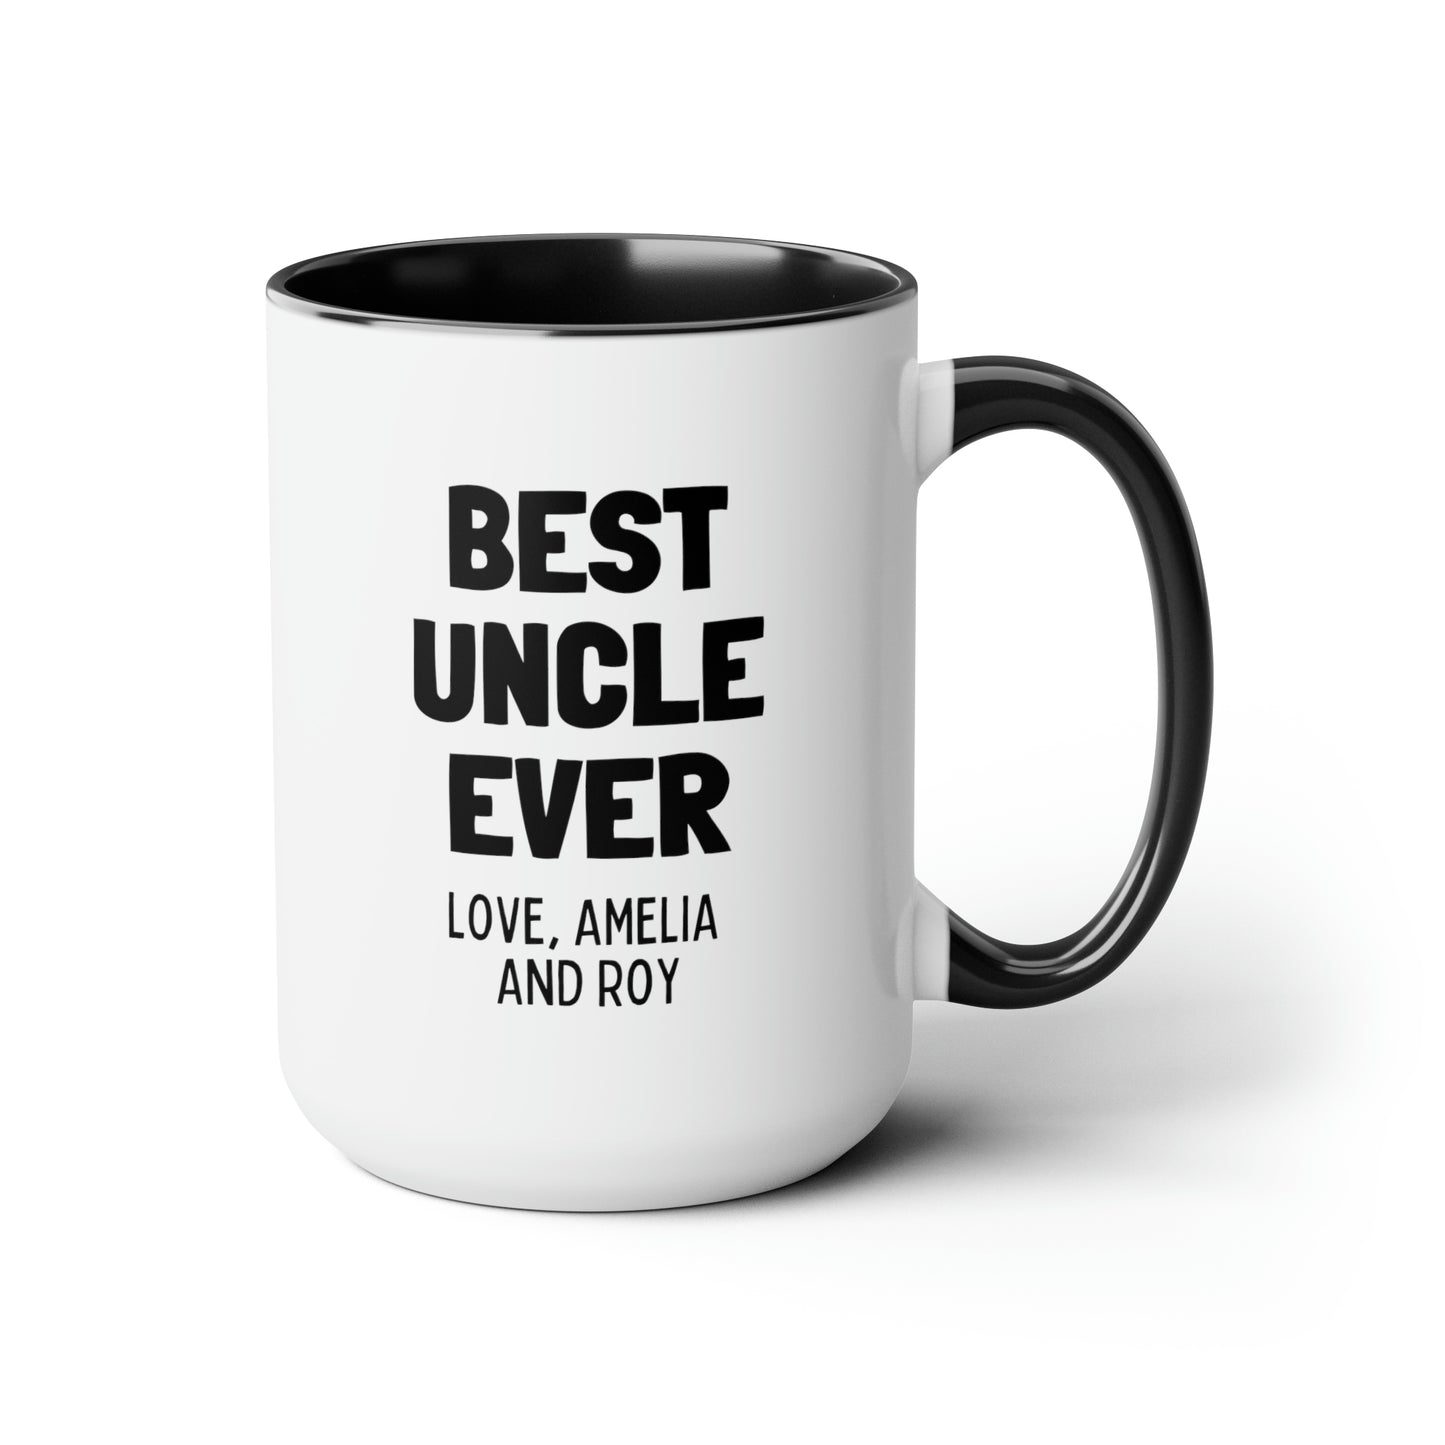 Best Uncle Ever 15oz white with black accent funny large coffee mug gift customized custom from niece nephew cups personalized waveywares wavey wares wavywares wavy wares